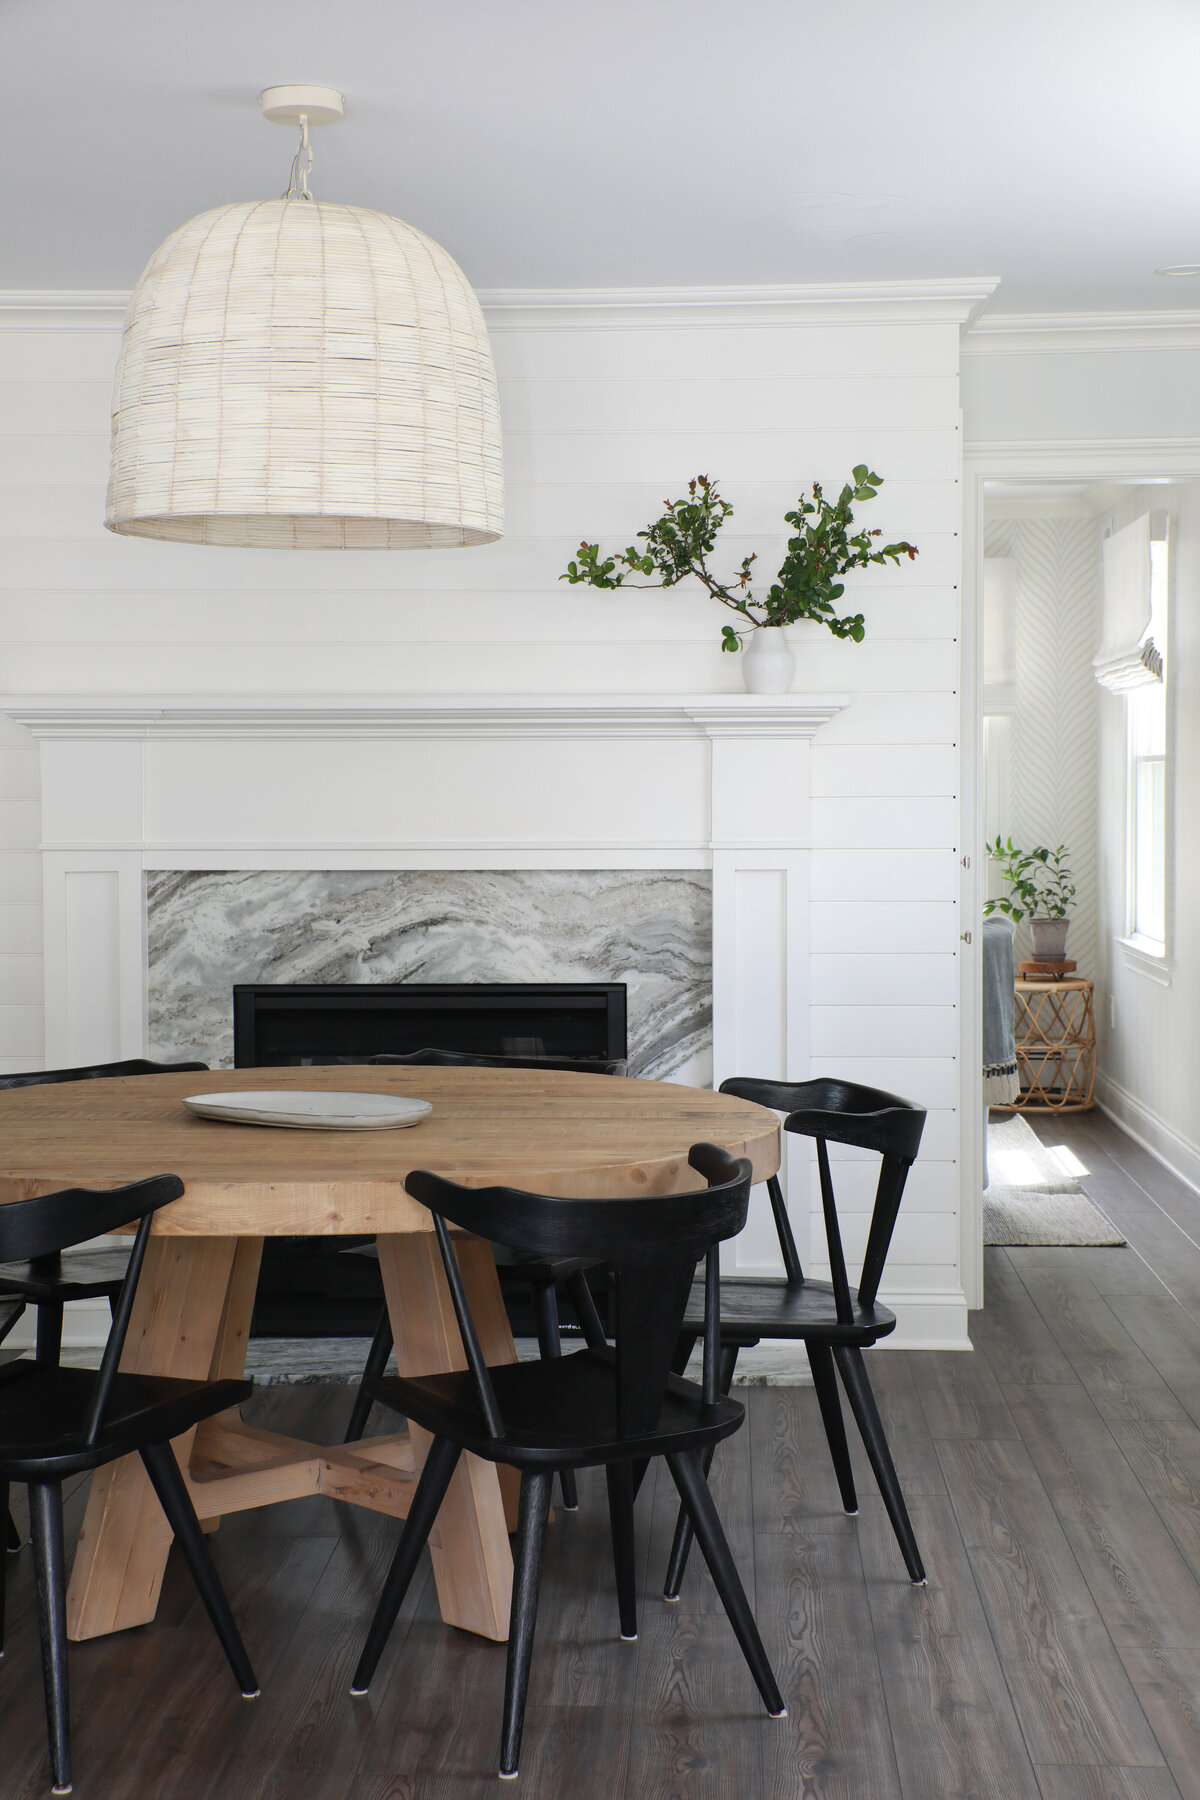 COASTAL-FIRESIDE-DINING-ROUND-TABLE-AIRY-FIXTURE